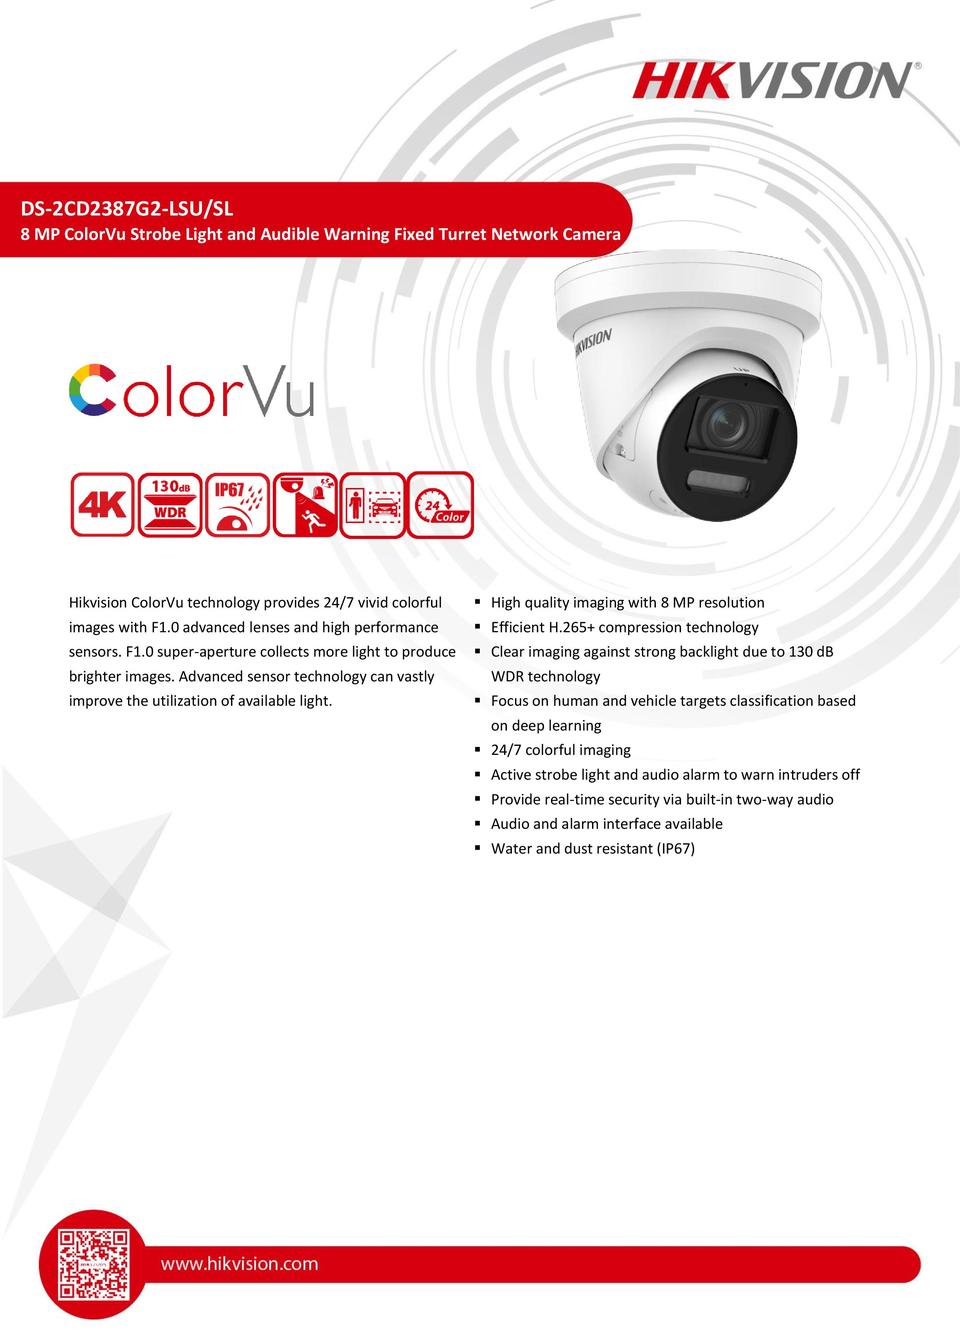 Hikvision DS-2CD2387G2-LSU/SL 8MP ColorVu with Acusense Turret Camera with 2.8mm Lens (1 Available) 0